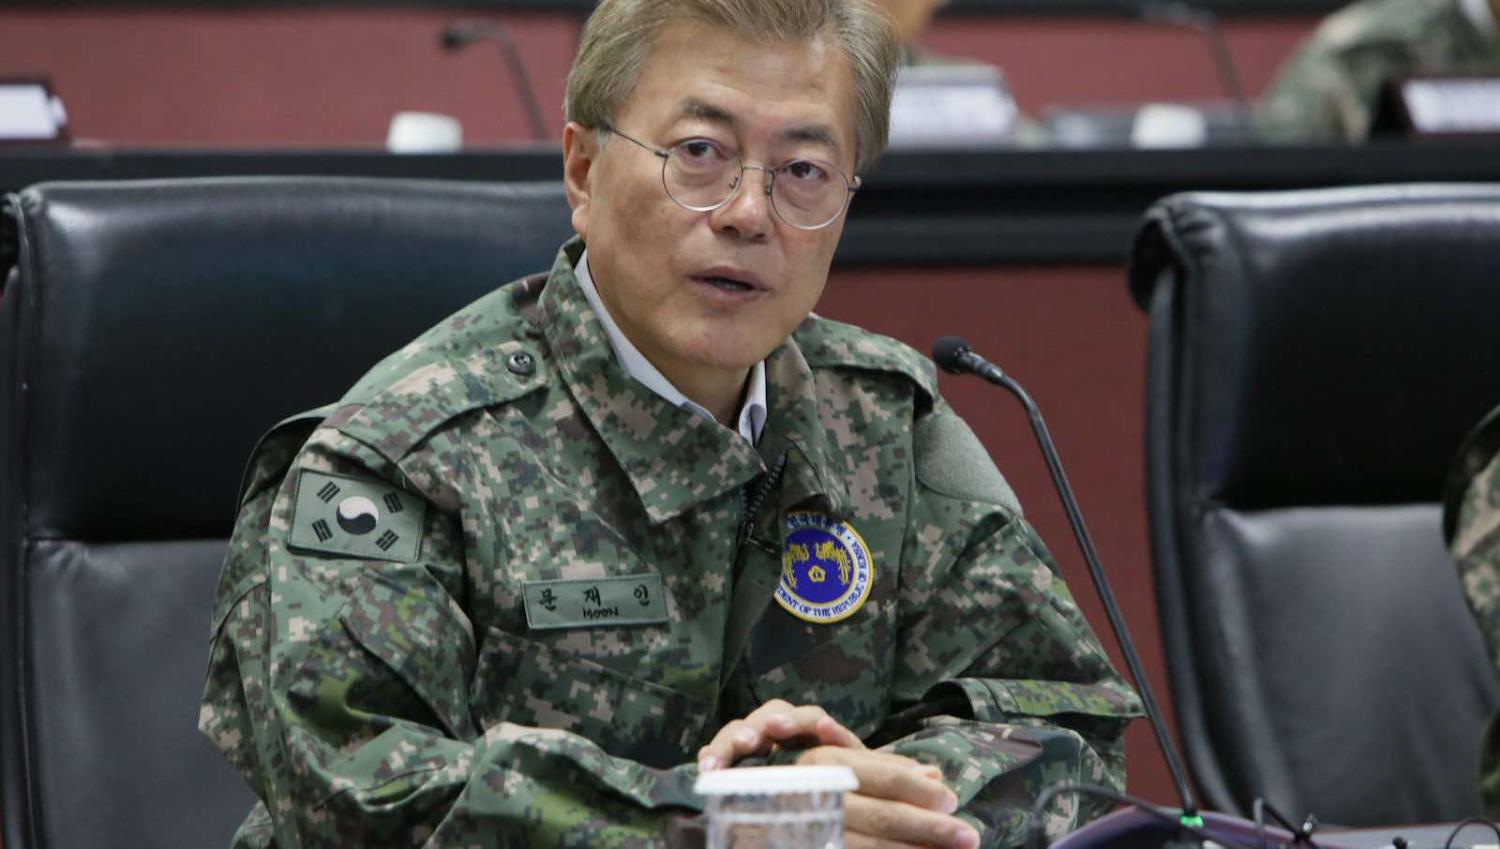 South Korean President Moon Jae-in during a visit to the US Army garrison at Yongsan in June 2017  (Photo: UNC - CFC - USFK/Flickr)